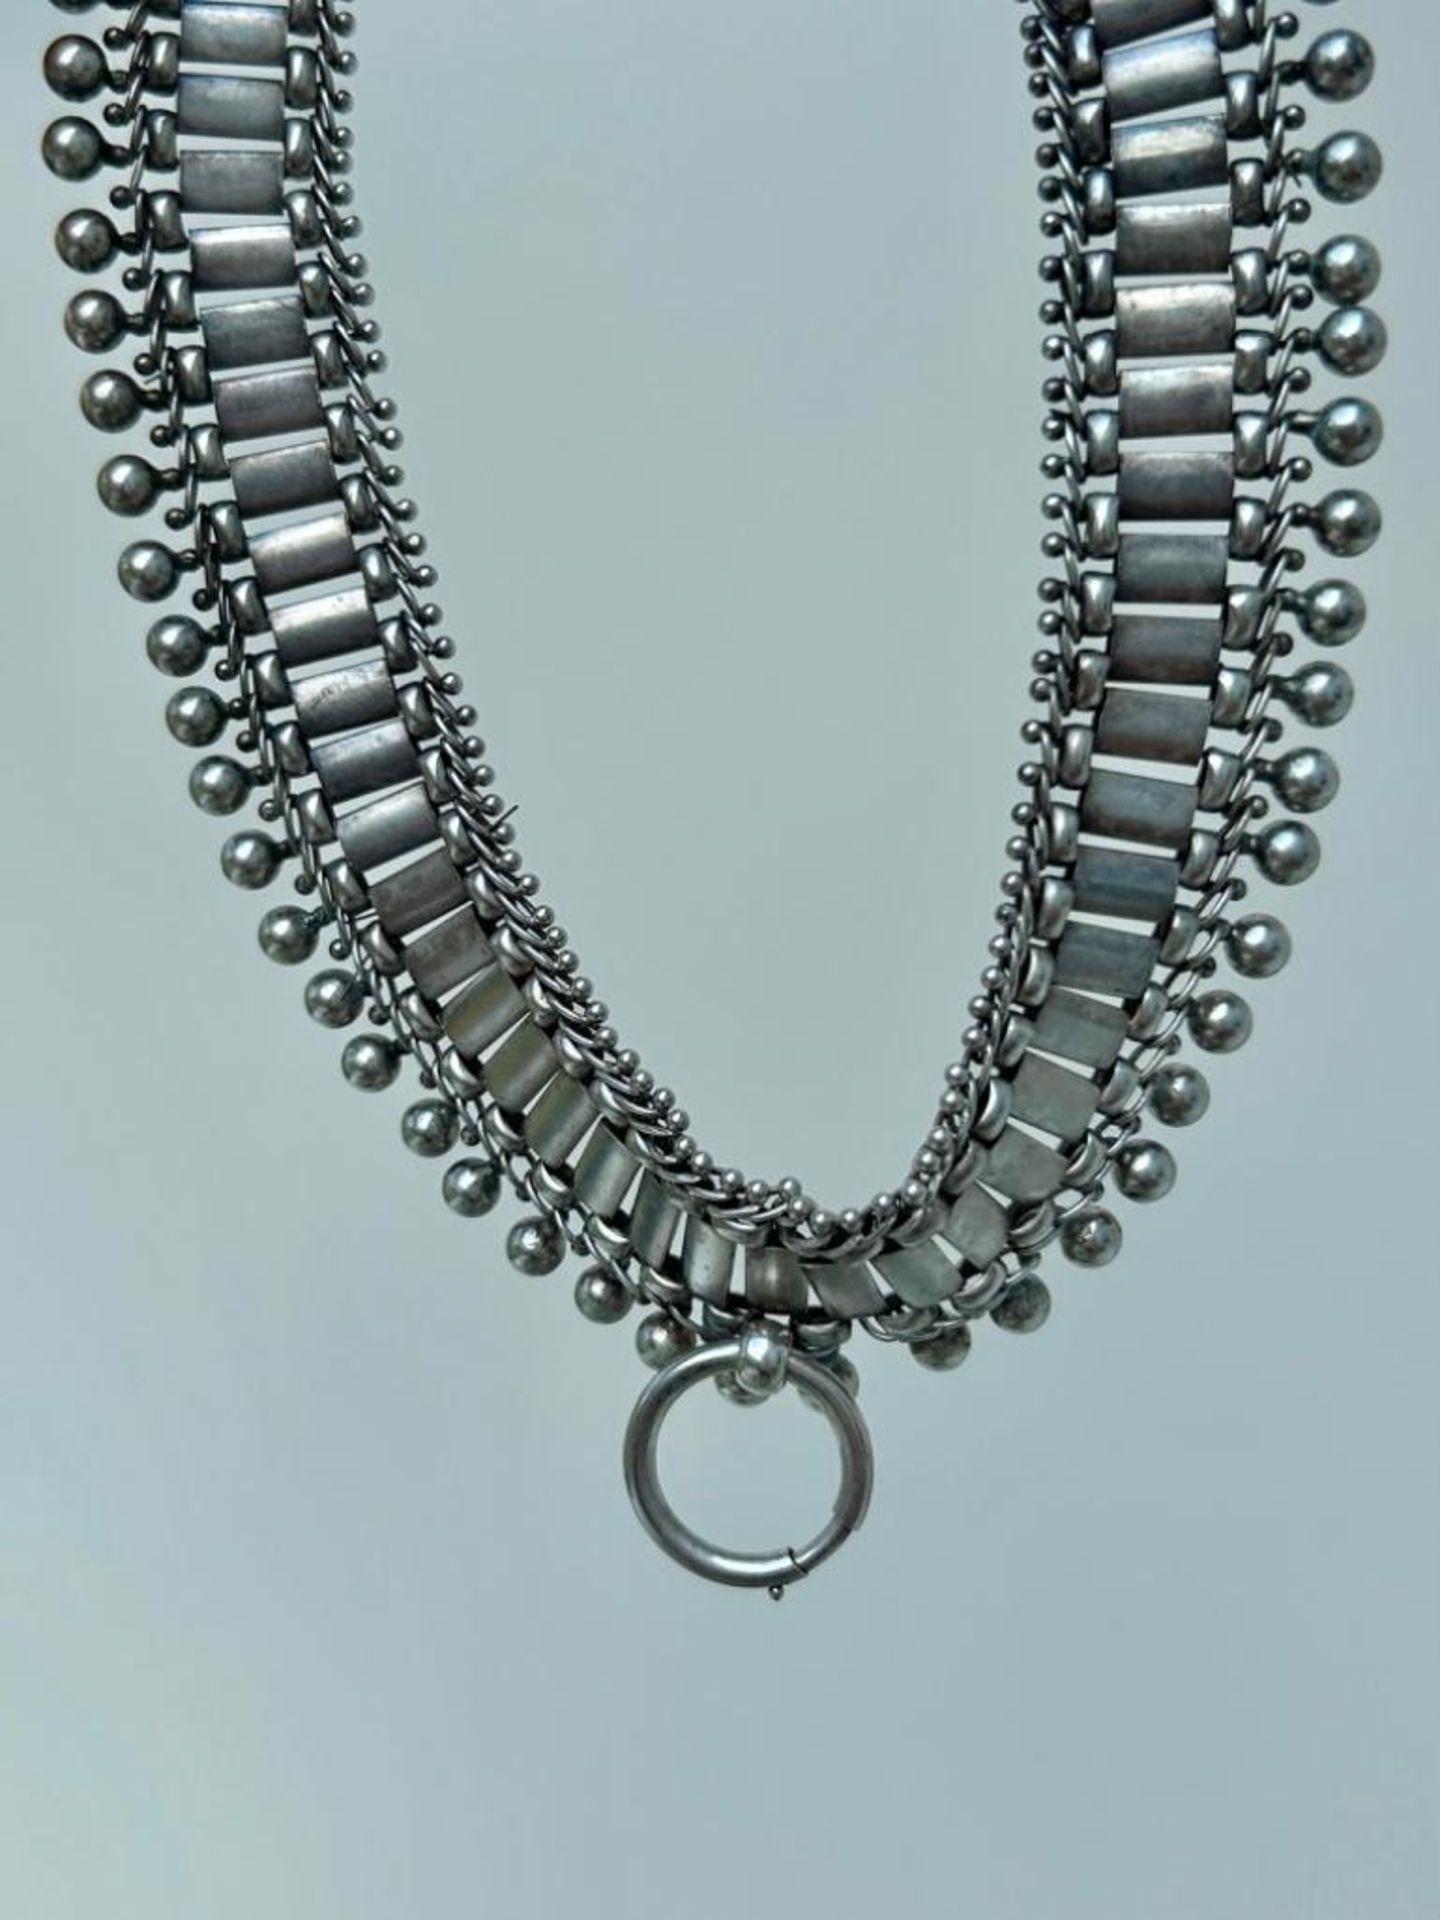 Huge Chunky Antique Silver Victorian Collar Necklace - Image 4 of 5